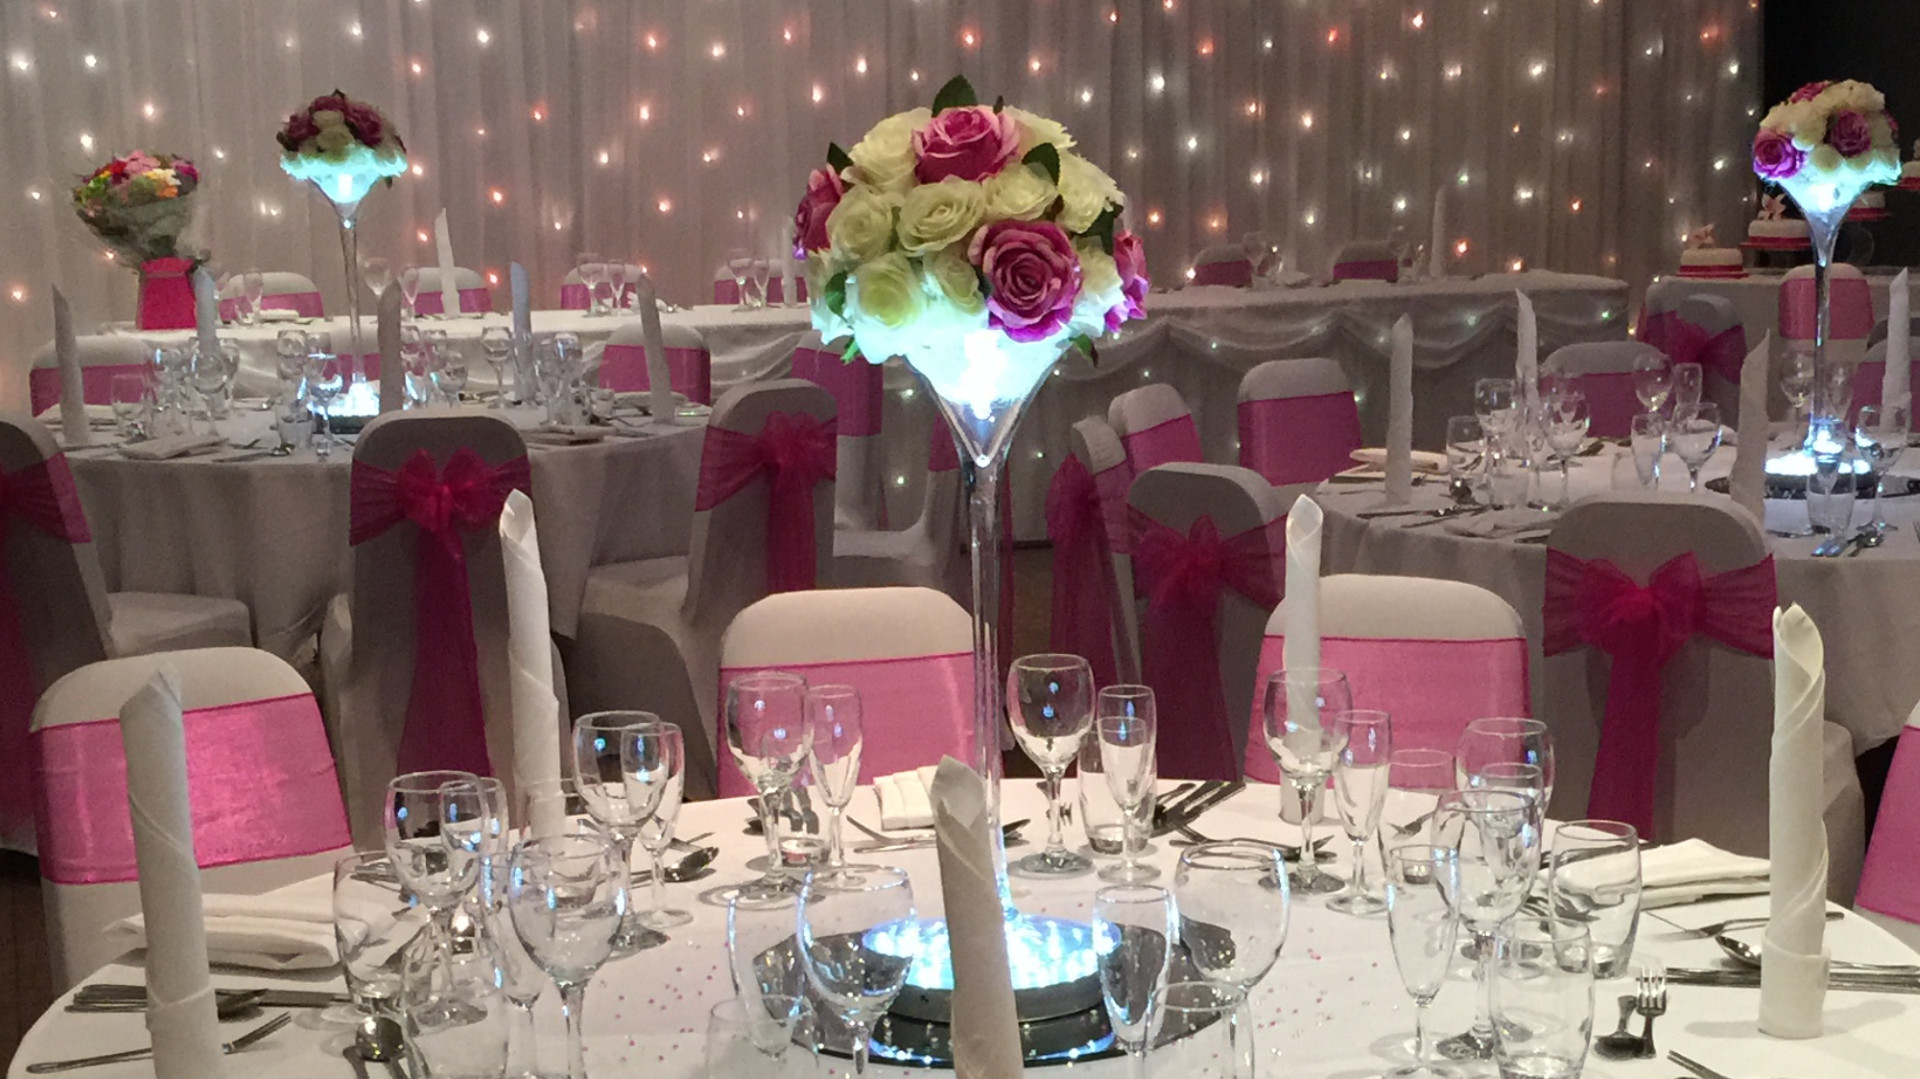 Lush Occassions Chair Covers, Sashes and Centrepieces